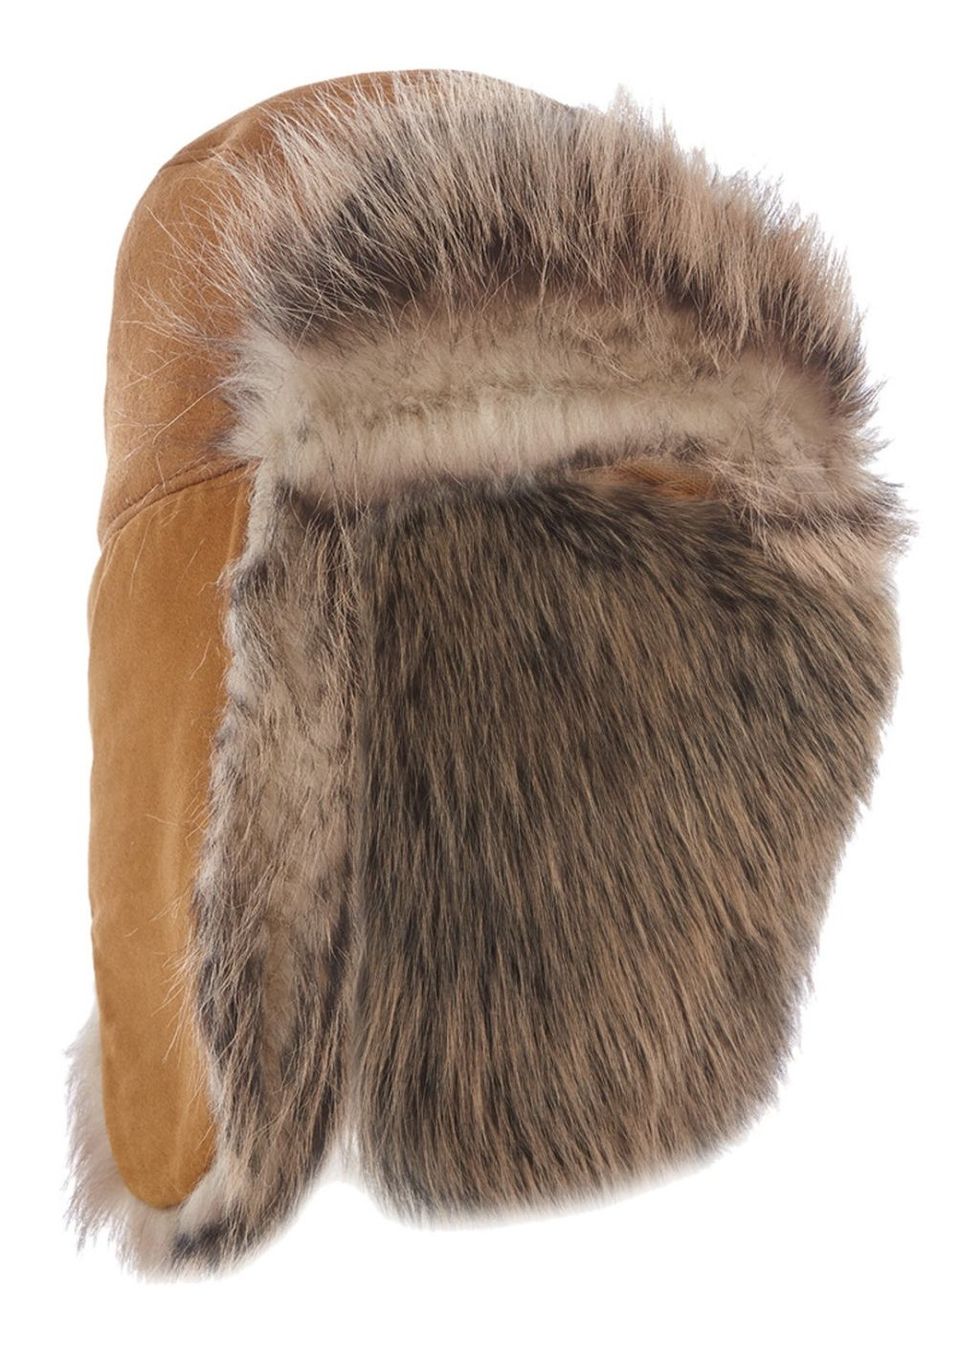 Brown, Textile, Tan, Fawn, Natural material, Fur, Beige, Liver, Close-up, Photography, 